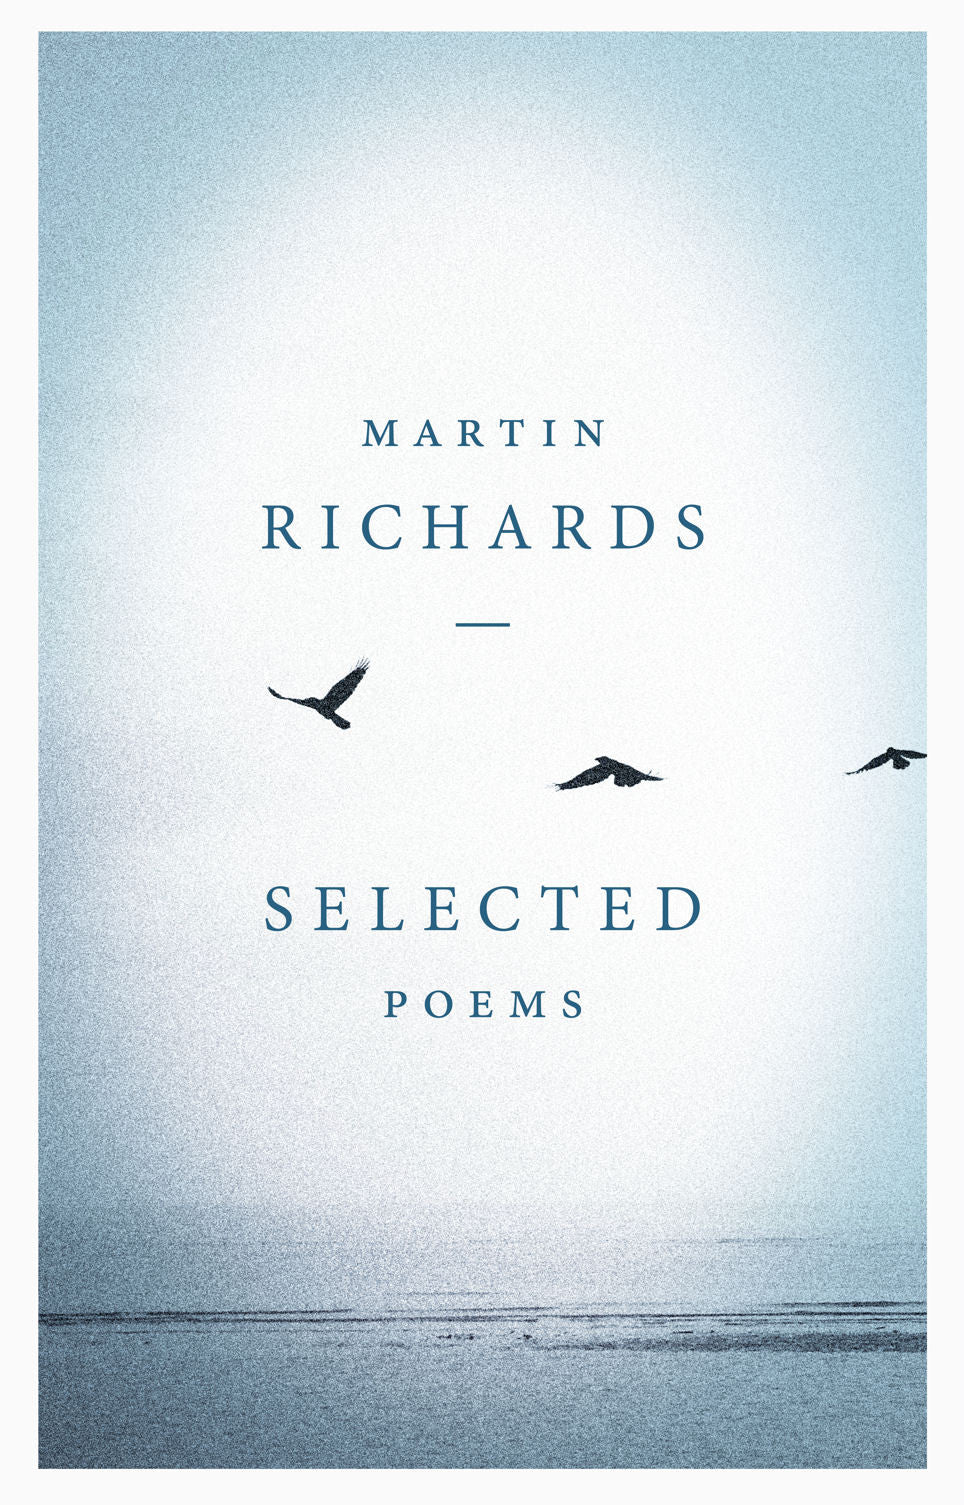 Martin Richards: Selected Poems